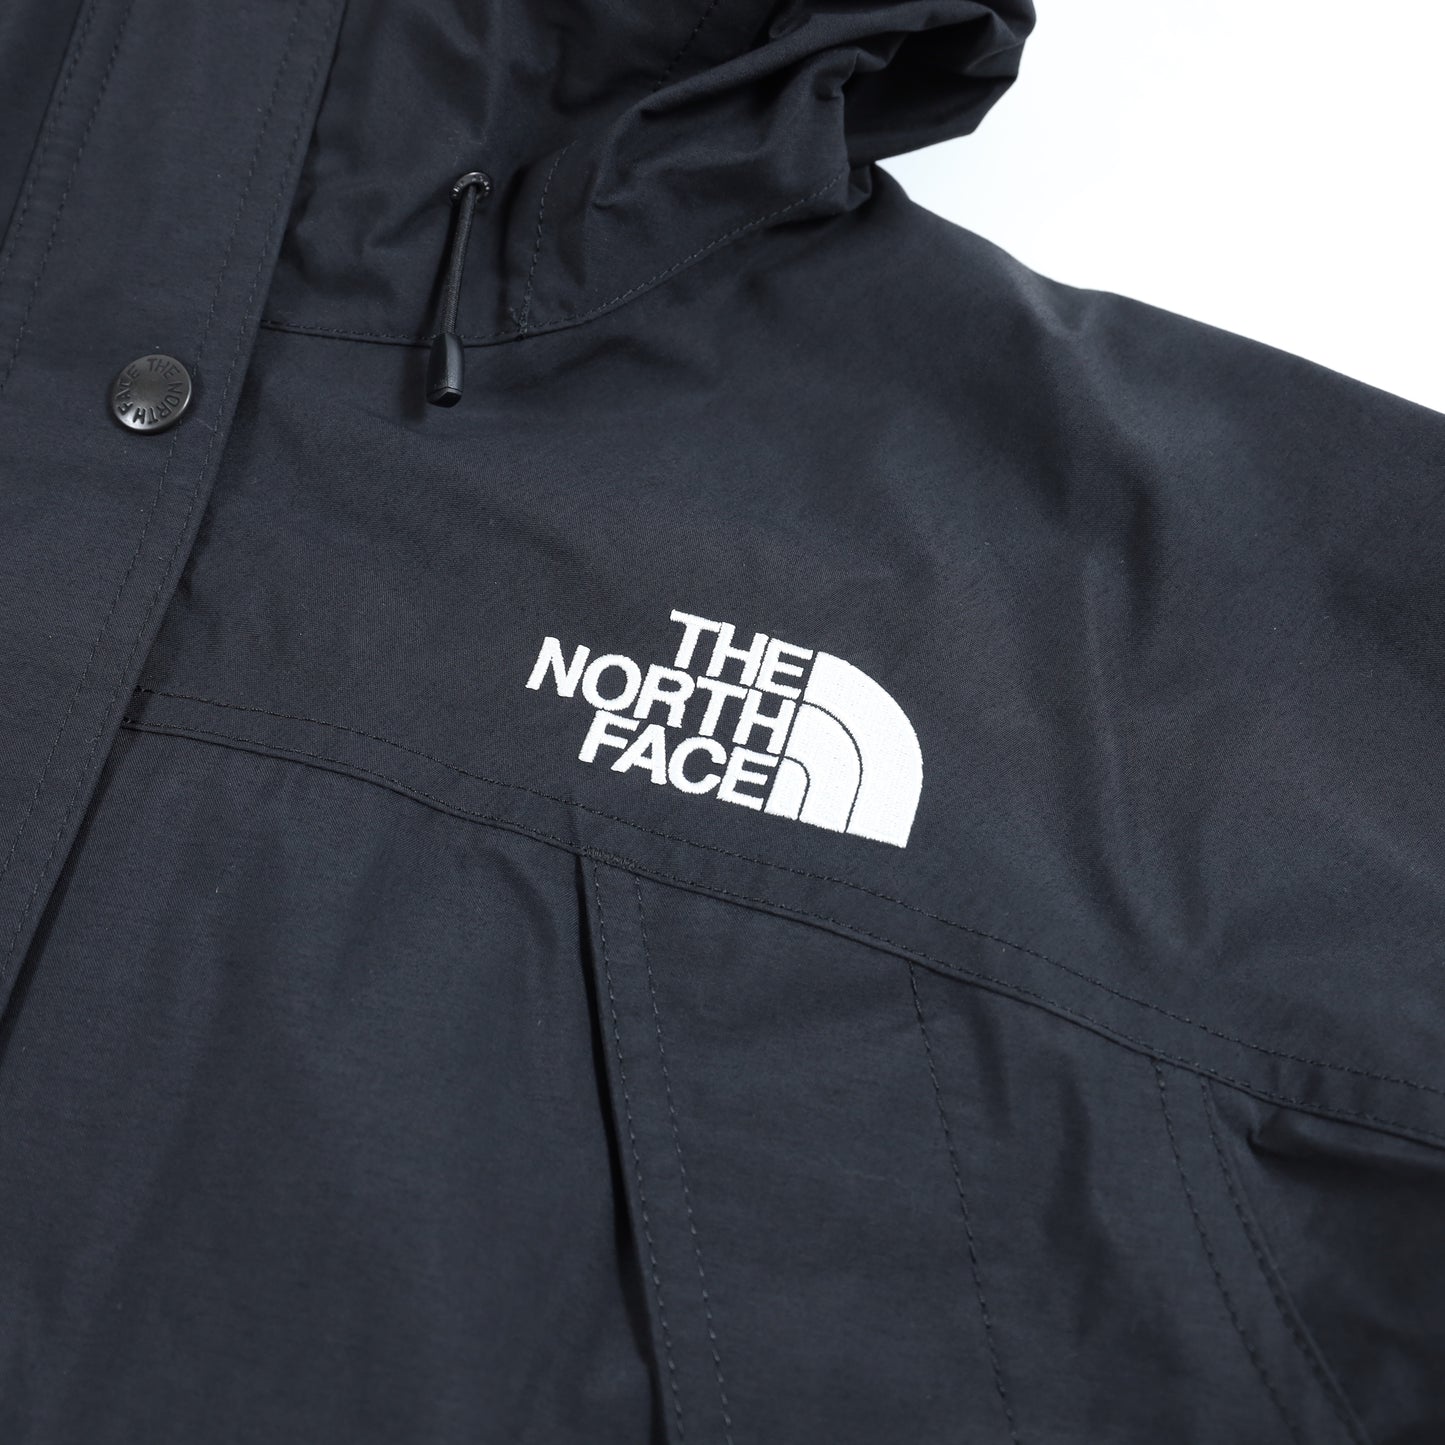 【THE NORTH FACE】Mountain Light Jacket Women's